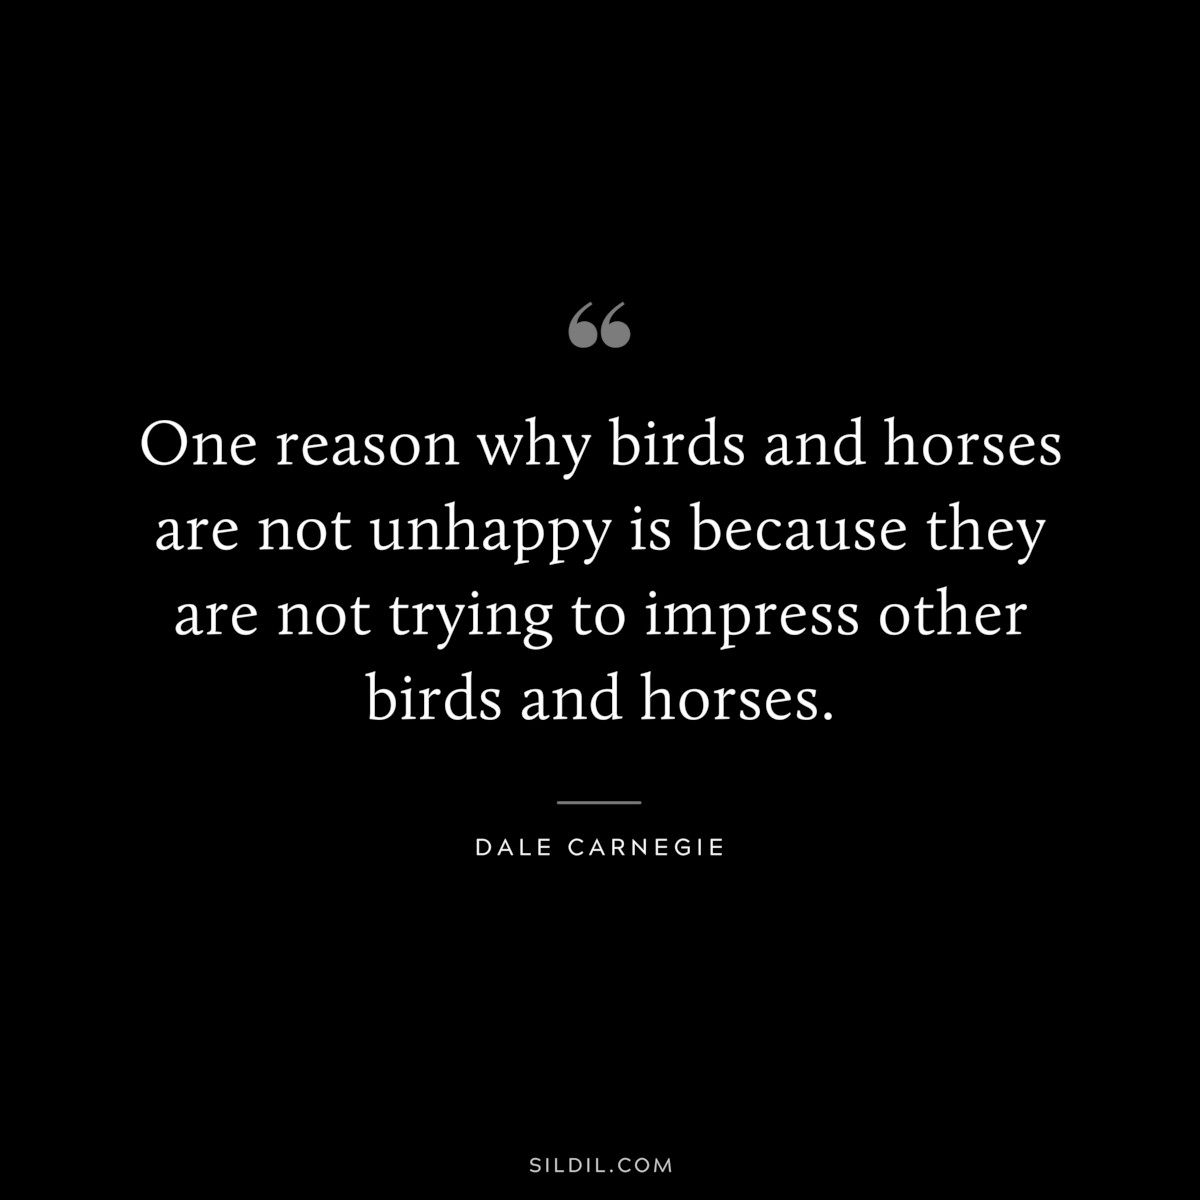 One reason why birds and horses are not unhappy is because they are not trying to impress other birds and horses.― Dale Carnegie